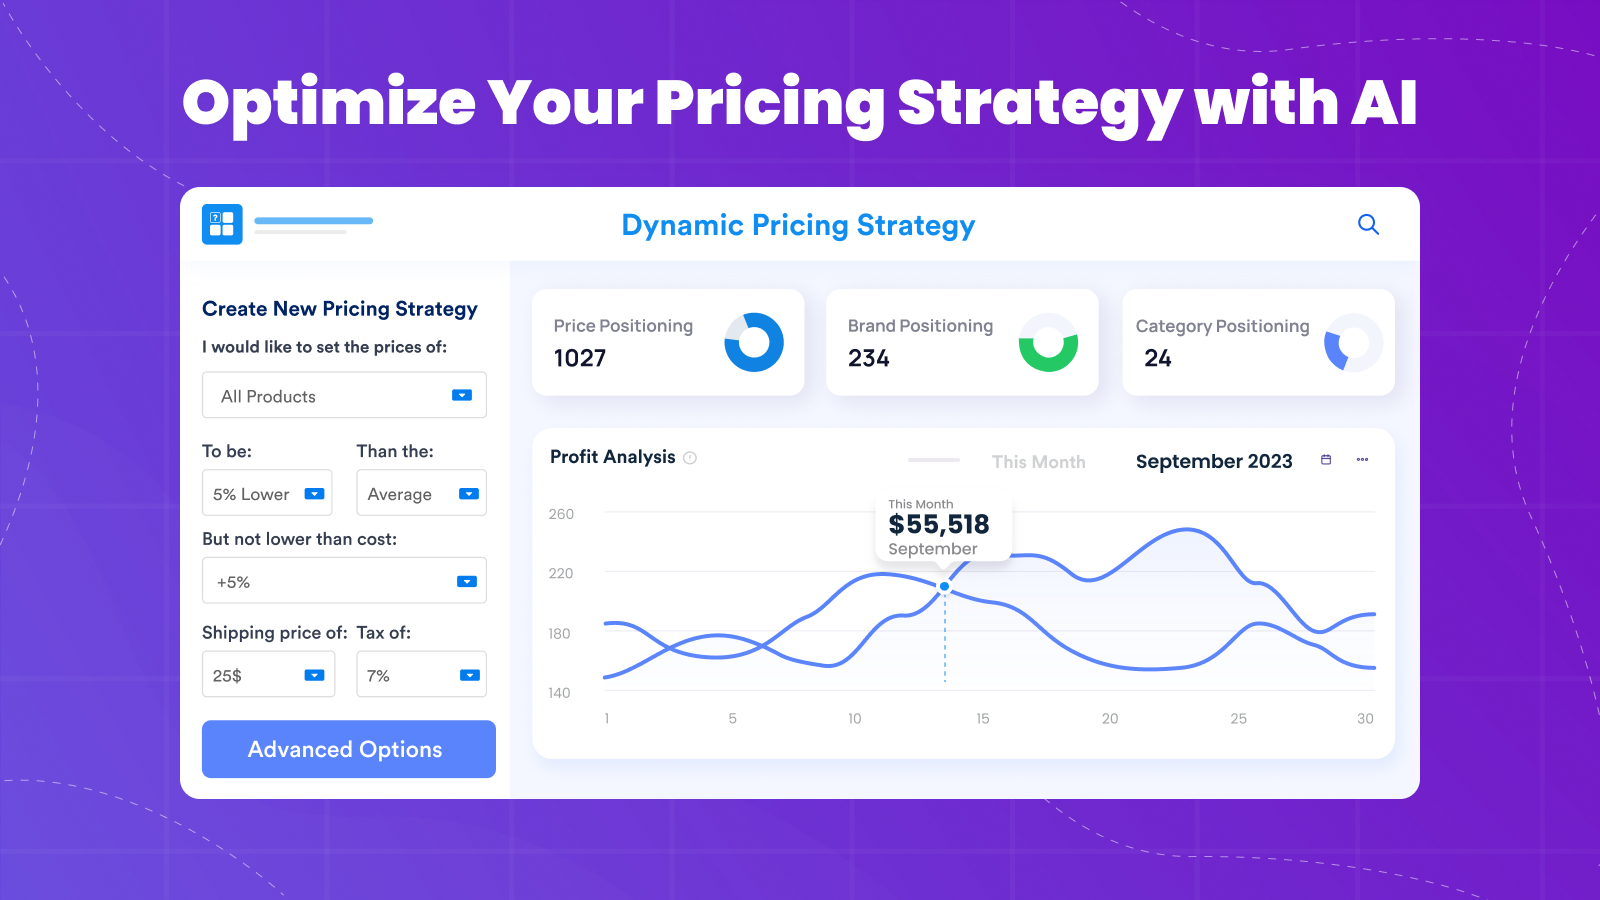 Optimize your pricing strategy with AI